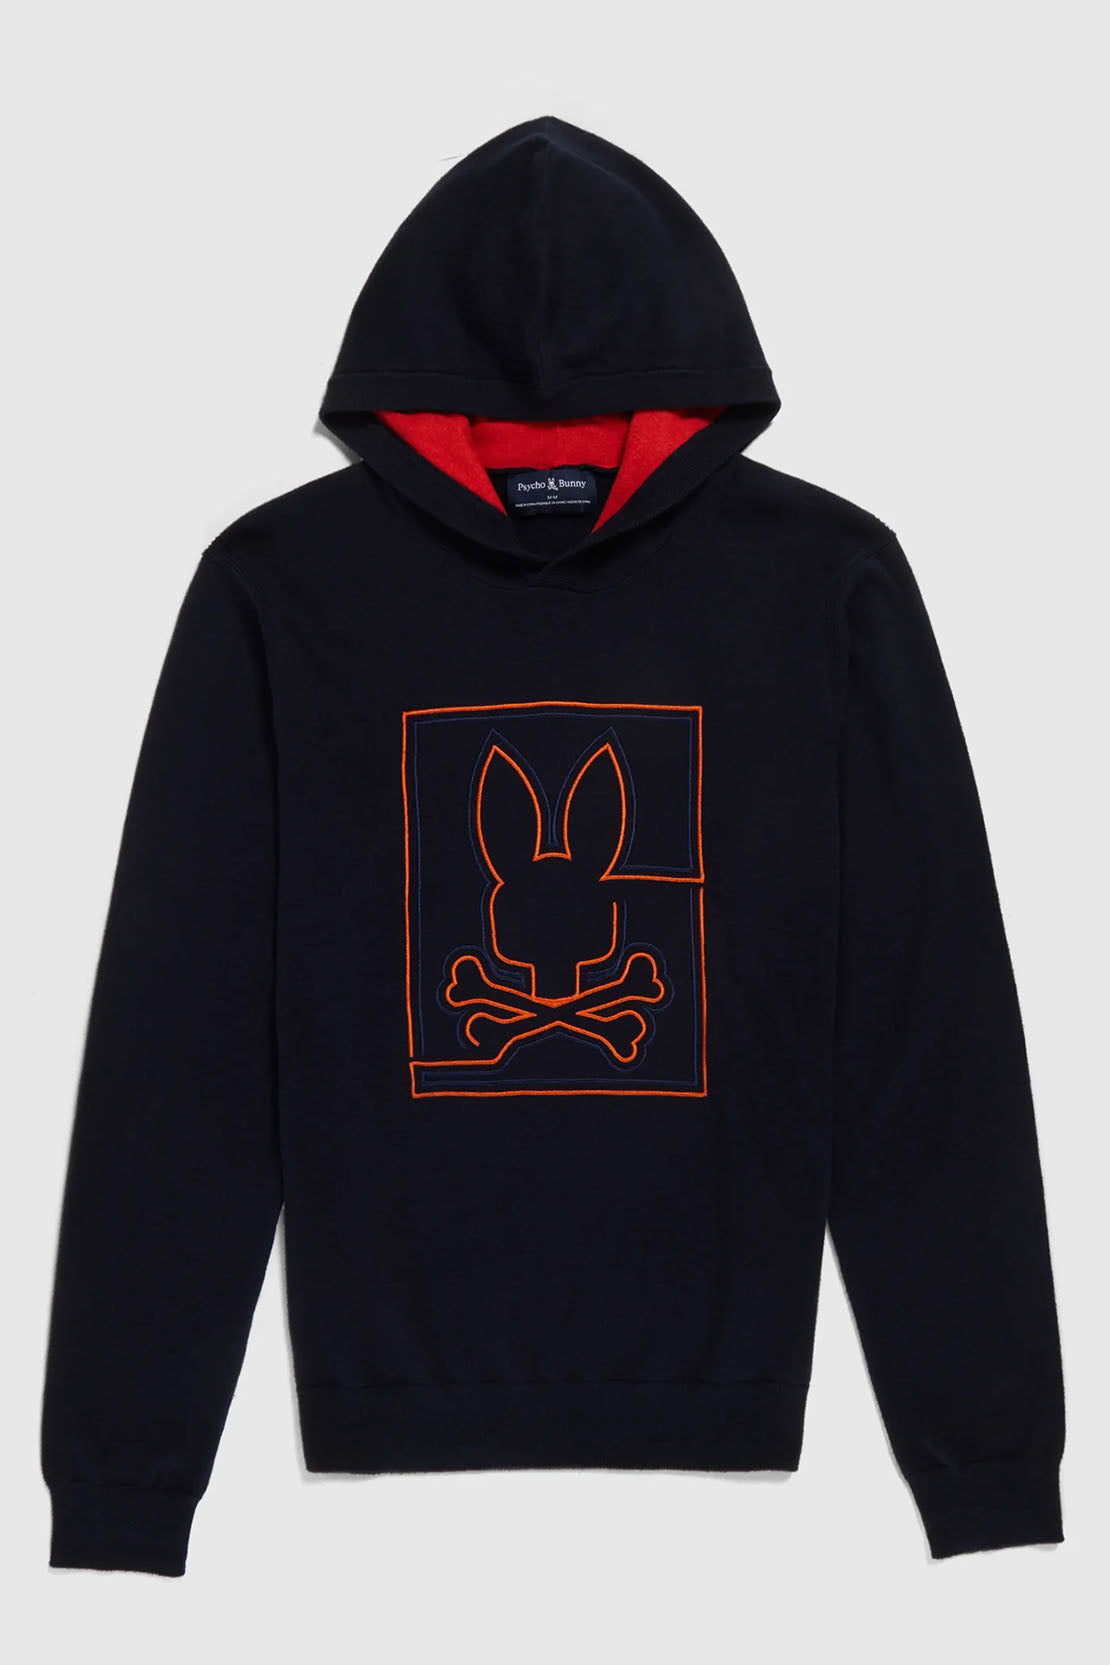 PSYCHO BUNNY - CHESTER Hooded Sweater in Navy Blue B6E520Z1SW